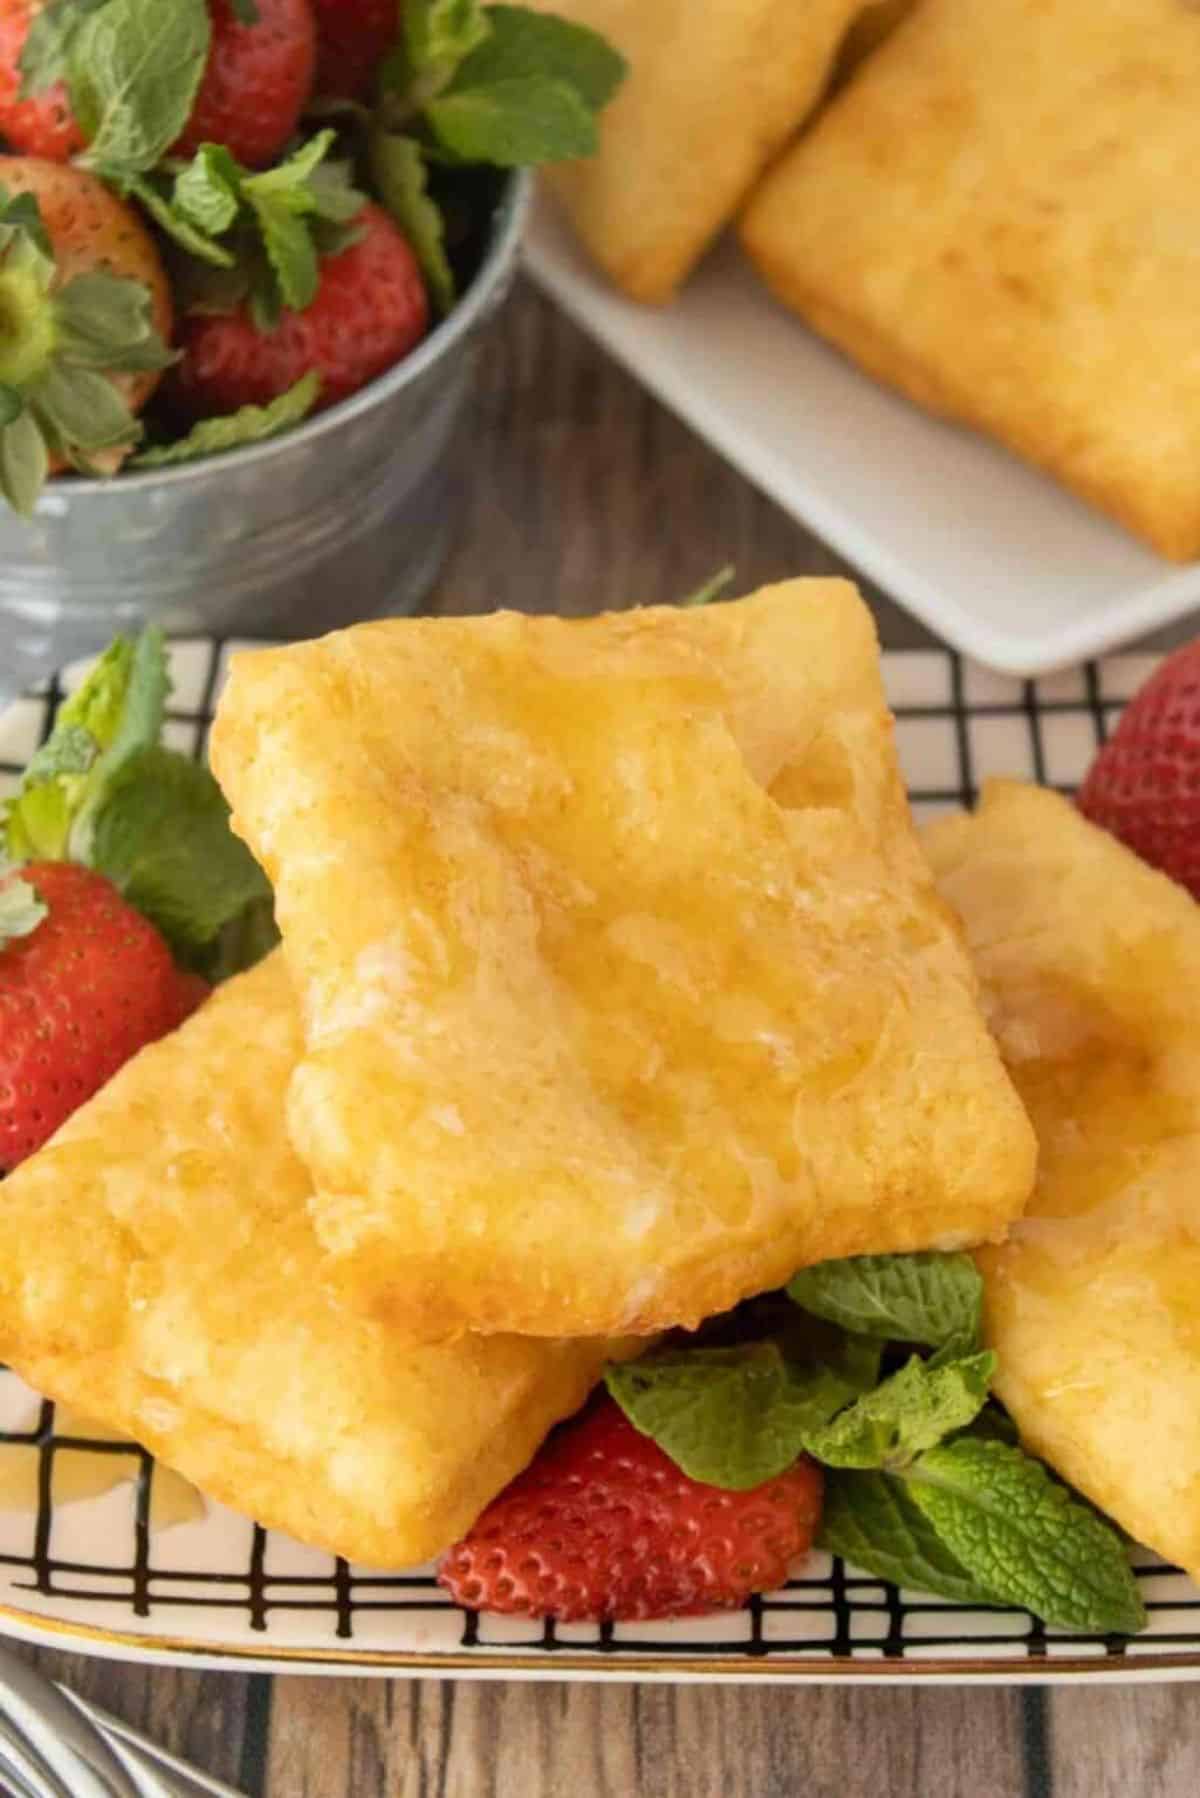 Fried Scones with strawberries on a resting grid.